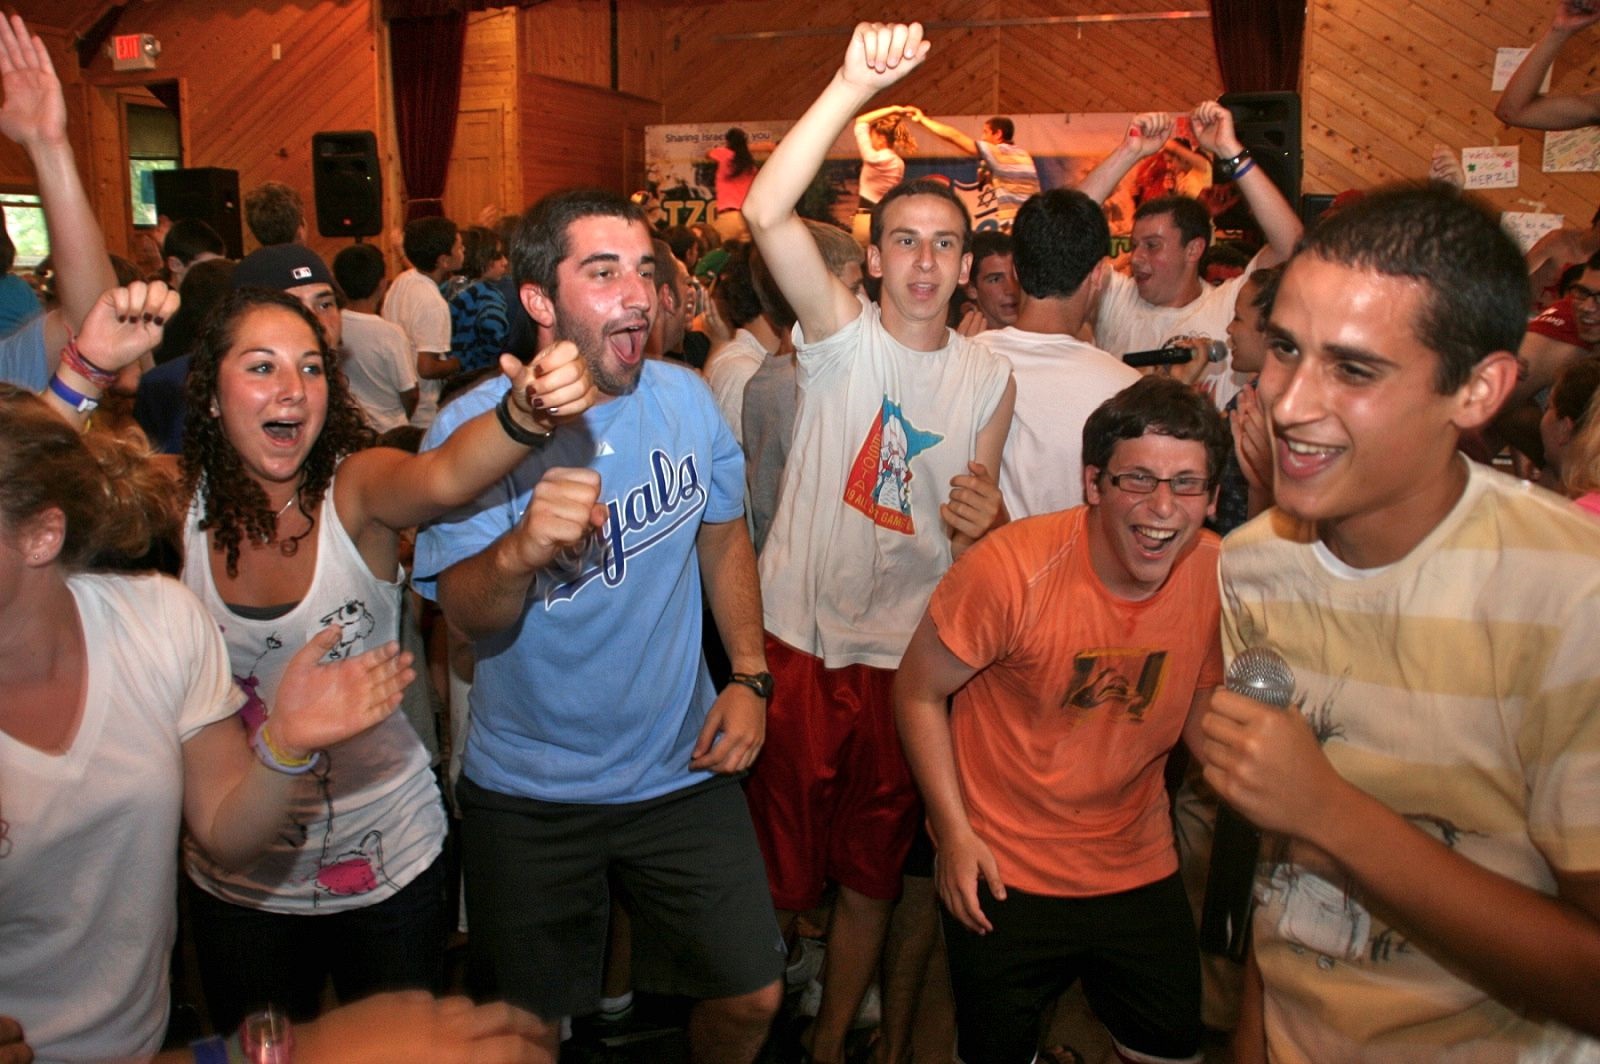 What's special about Herzl Camp Specialty Camps? Everything